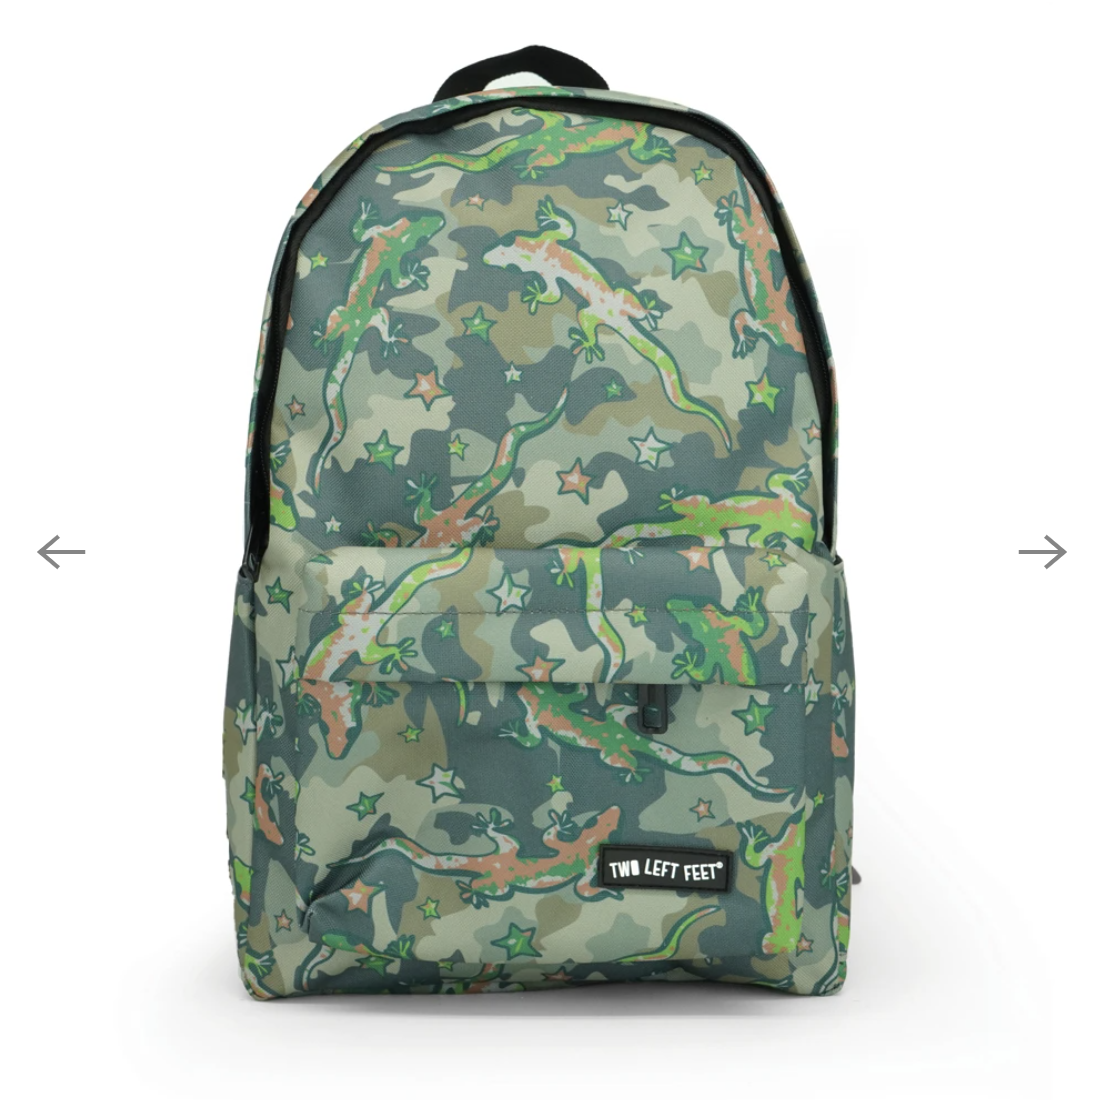 Two Left Feet Backpack - Camo Crawler (Small 15x10x4.5 inches)-Two Left Feet-Little Giant Kidz